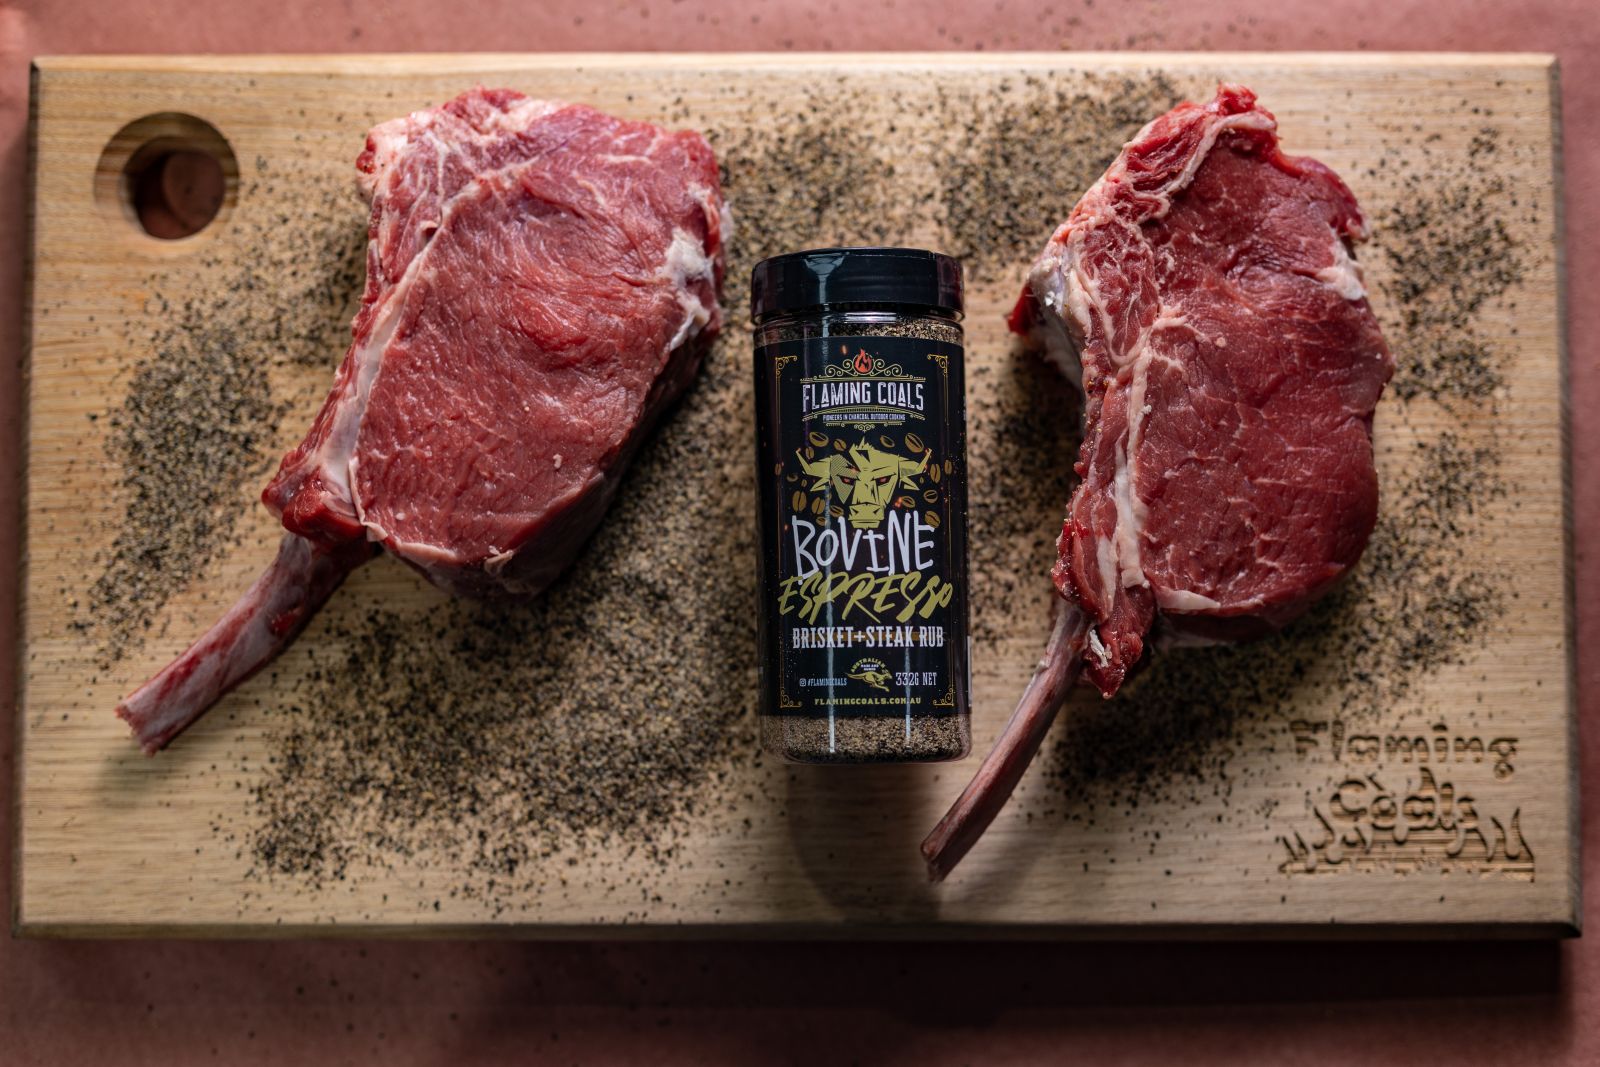 This is a picture of Bovine espresso being used to season some steaks. This is the best steak rub available